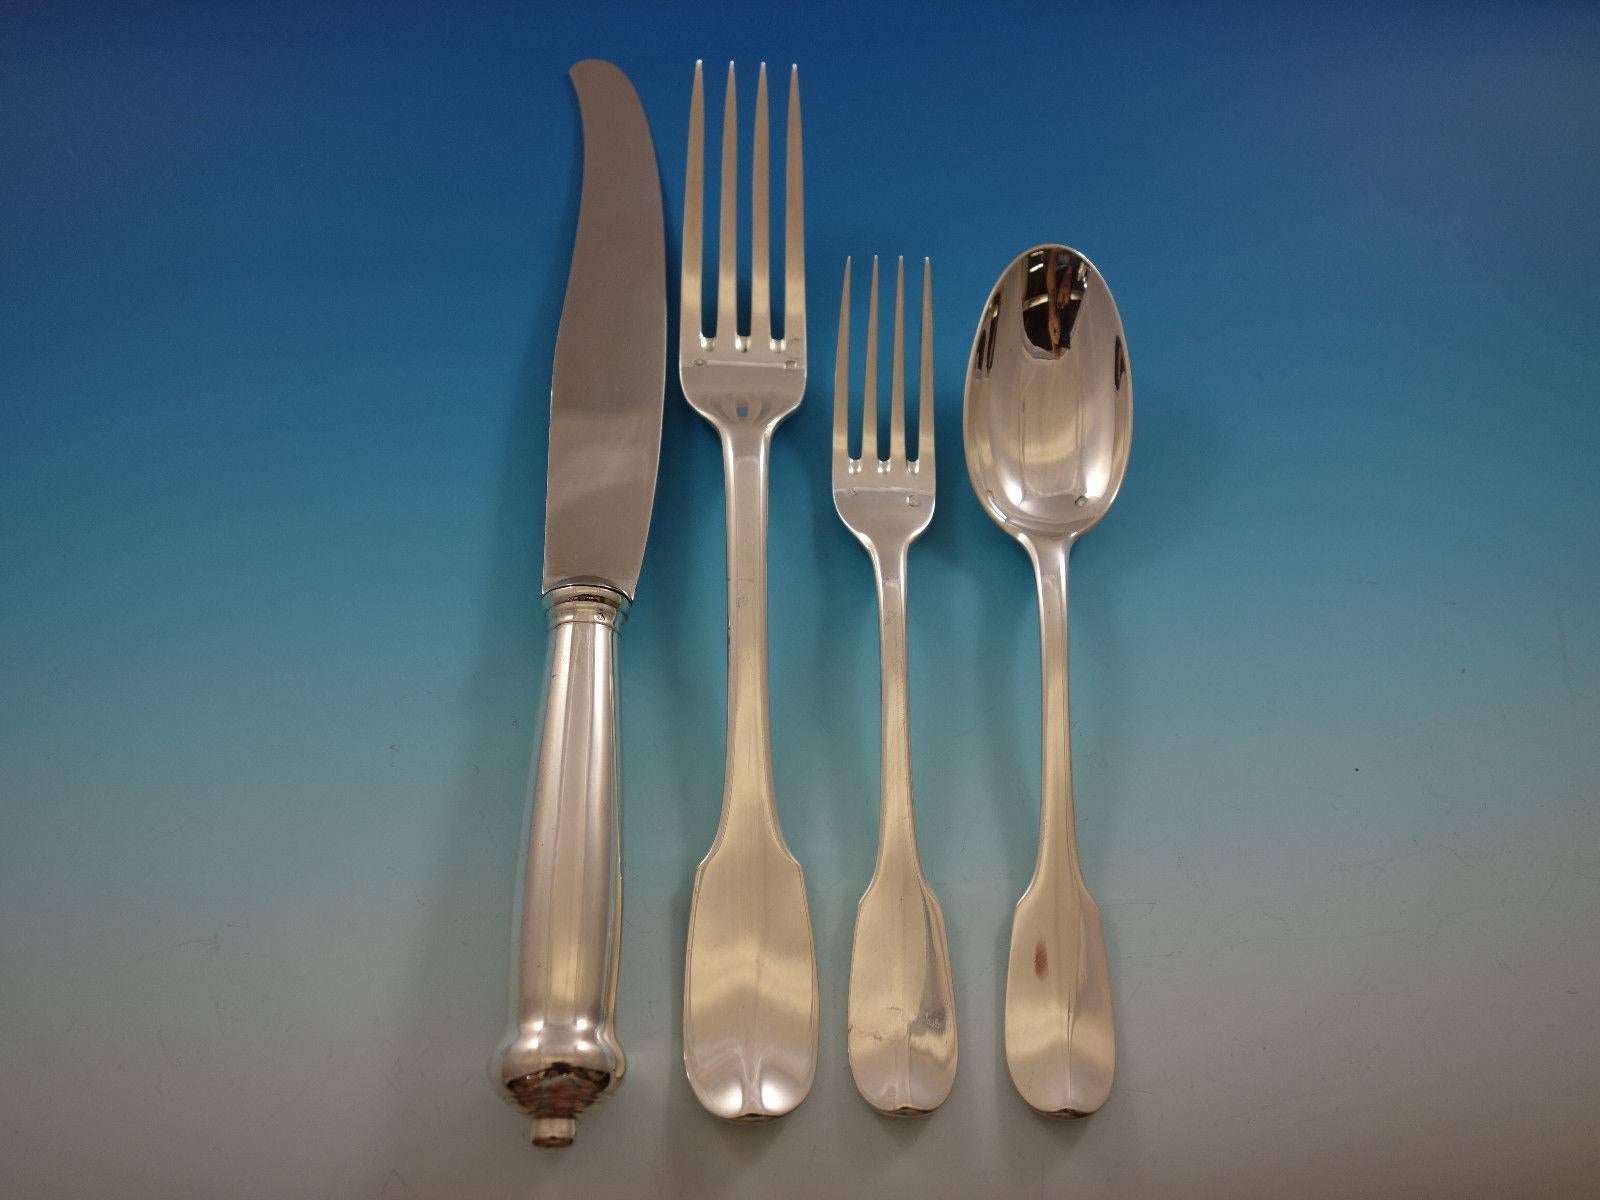 Exceptional Louvois by Puiforcat sterling silver flatware set. This set includes: 

24 Dinner Knives, 9 5/8”, 
48 Dinner Forks, 8 3/8”, 4 tine, 
24 Regular Knives, 8 3/8, *12 w/ stainless blade, *12 w/ sterling blade, 
24 Salad forks, 6 ¾”, 4 tine,